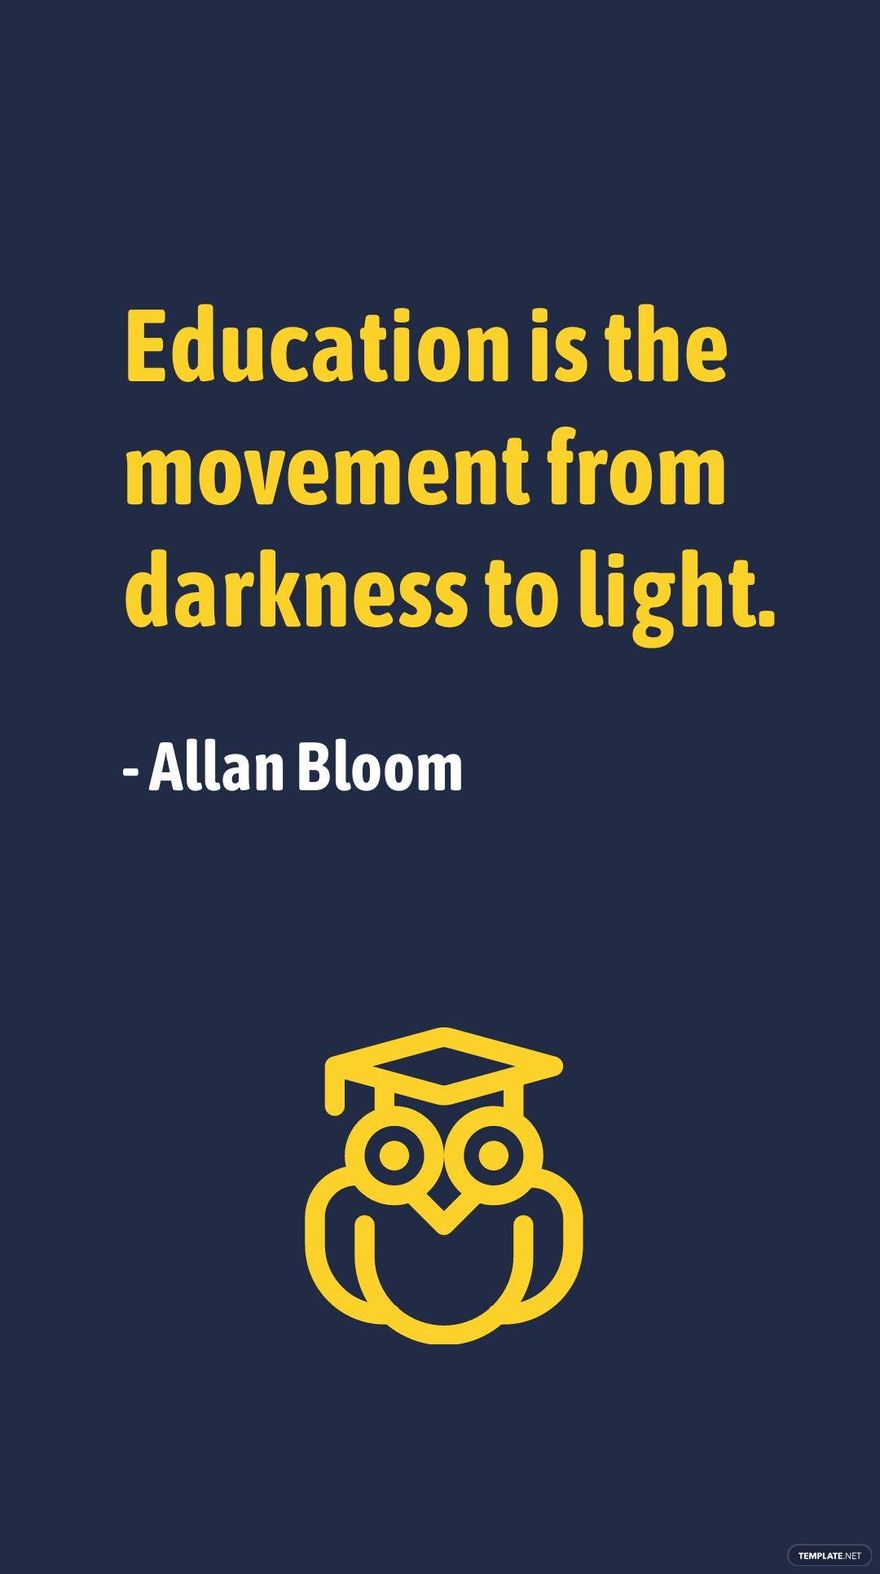 Free Allan Bloom - Education is the movement from darkness to light. in JPG